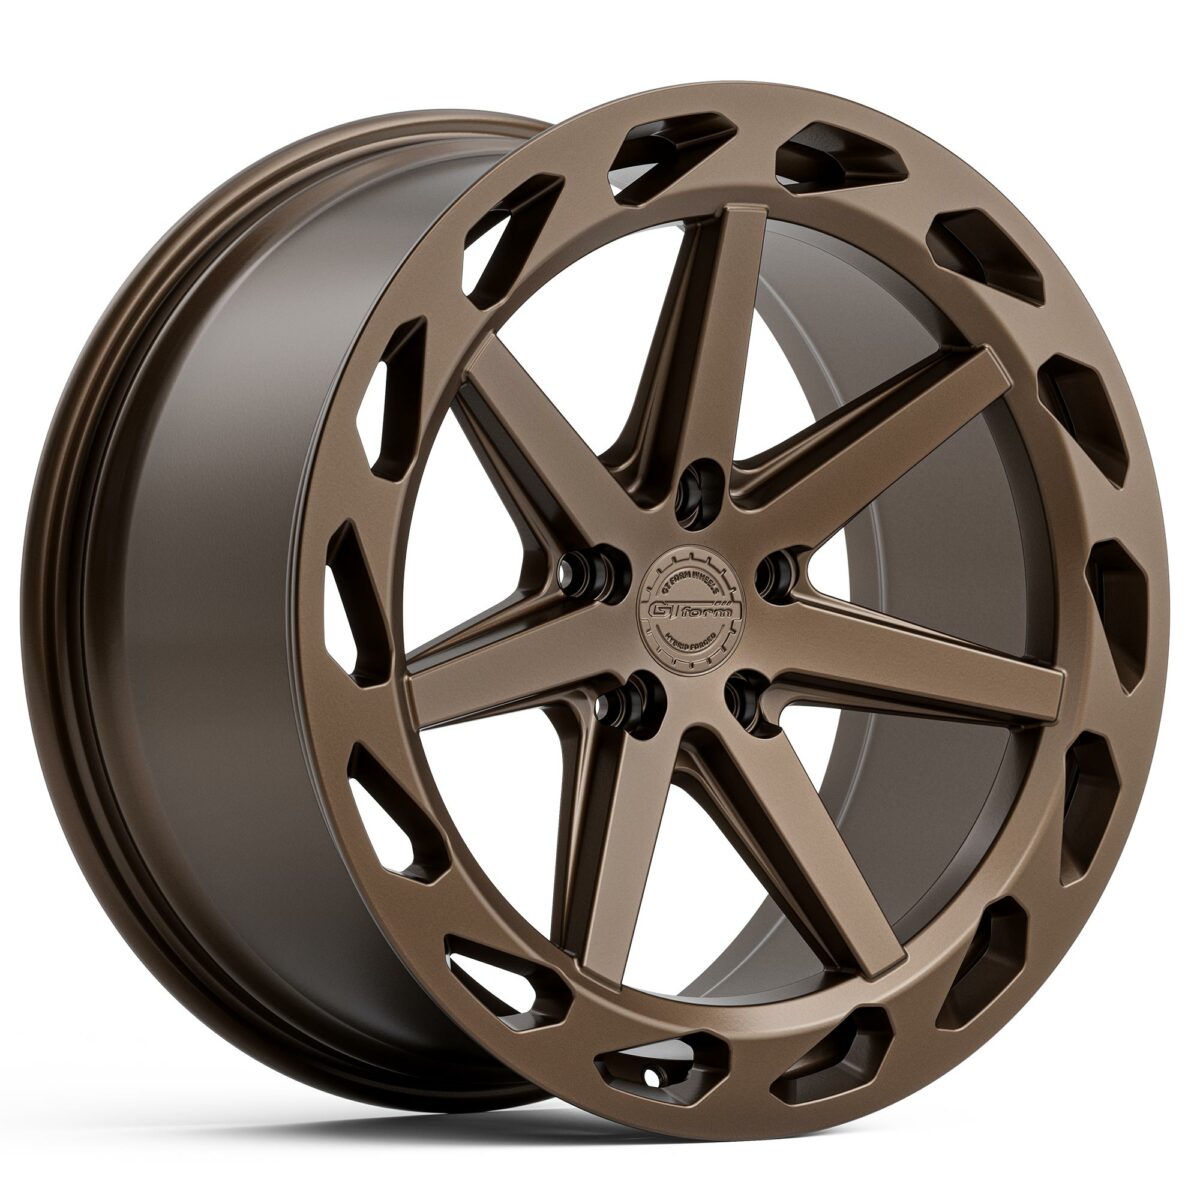 PERFORMANCE WHEELS GT FORM HF4.1 HYBRID FORGED TRIPLE BRONZE 20X9 20X10 20X11 STAGGERED RIMS